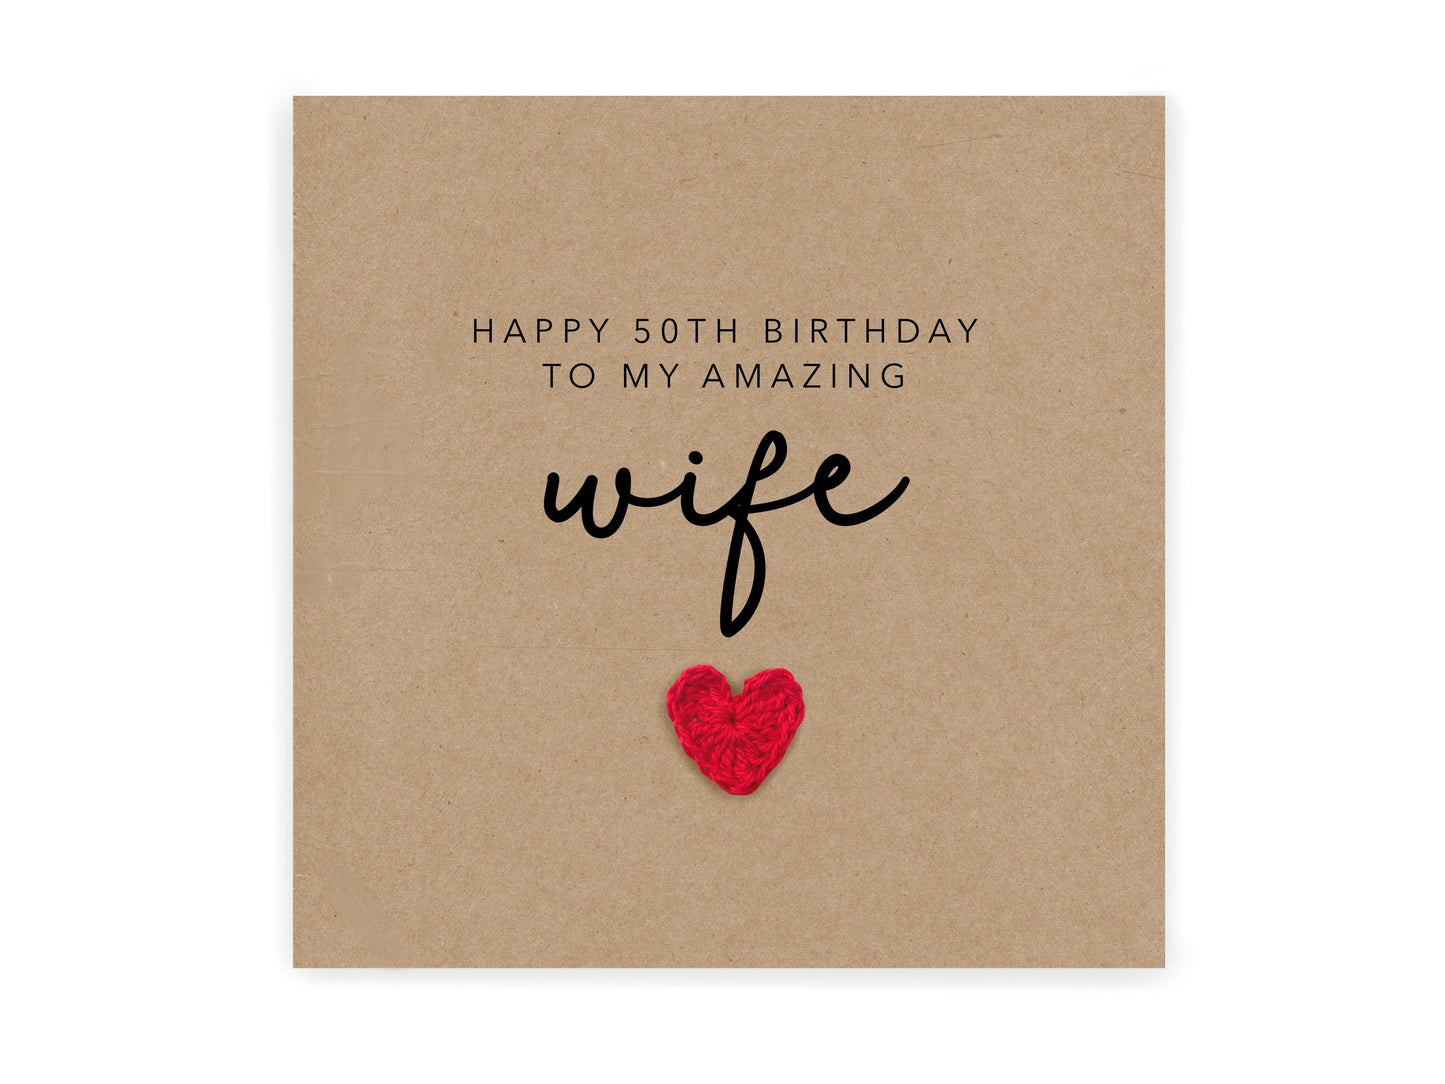 To An Amazing Wife  Happy 50th Birthday, Wife Birthday Card 50, Birthday Card, Wife 50th Birthday Card, Wife Birthday, Any Age, Card for her